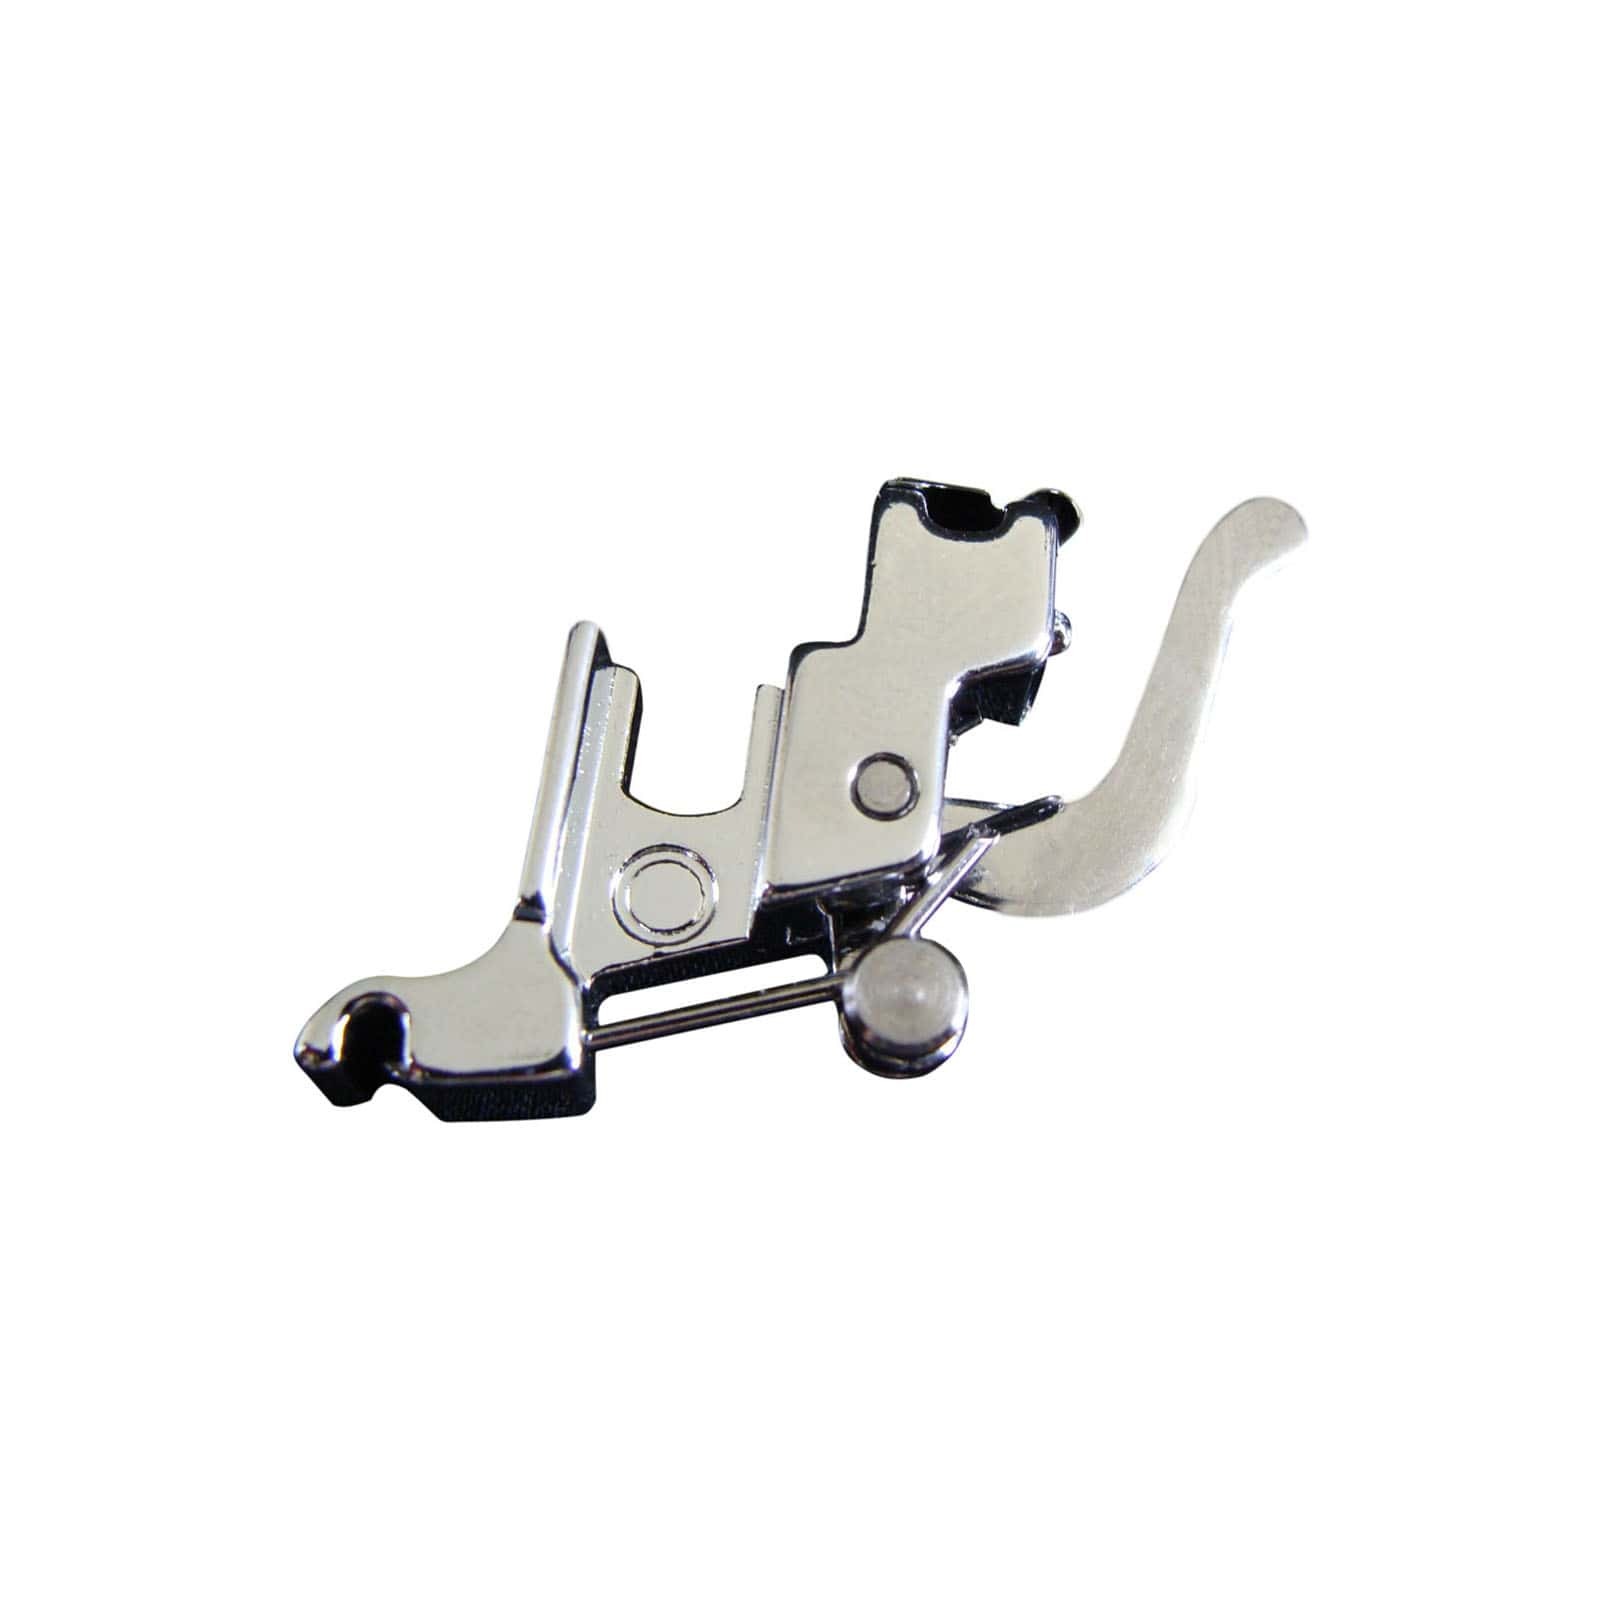 BROTHER Sewing Machine Low Shank Presser Foot Holder Snap On Ankle Adapter 